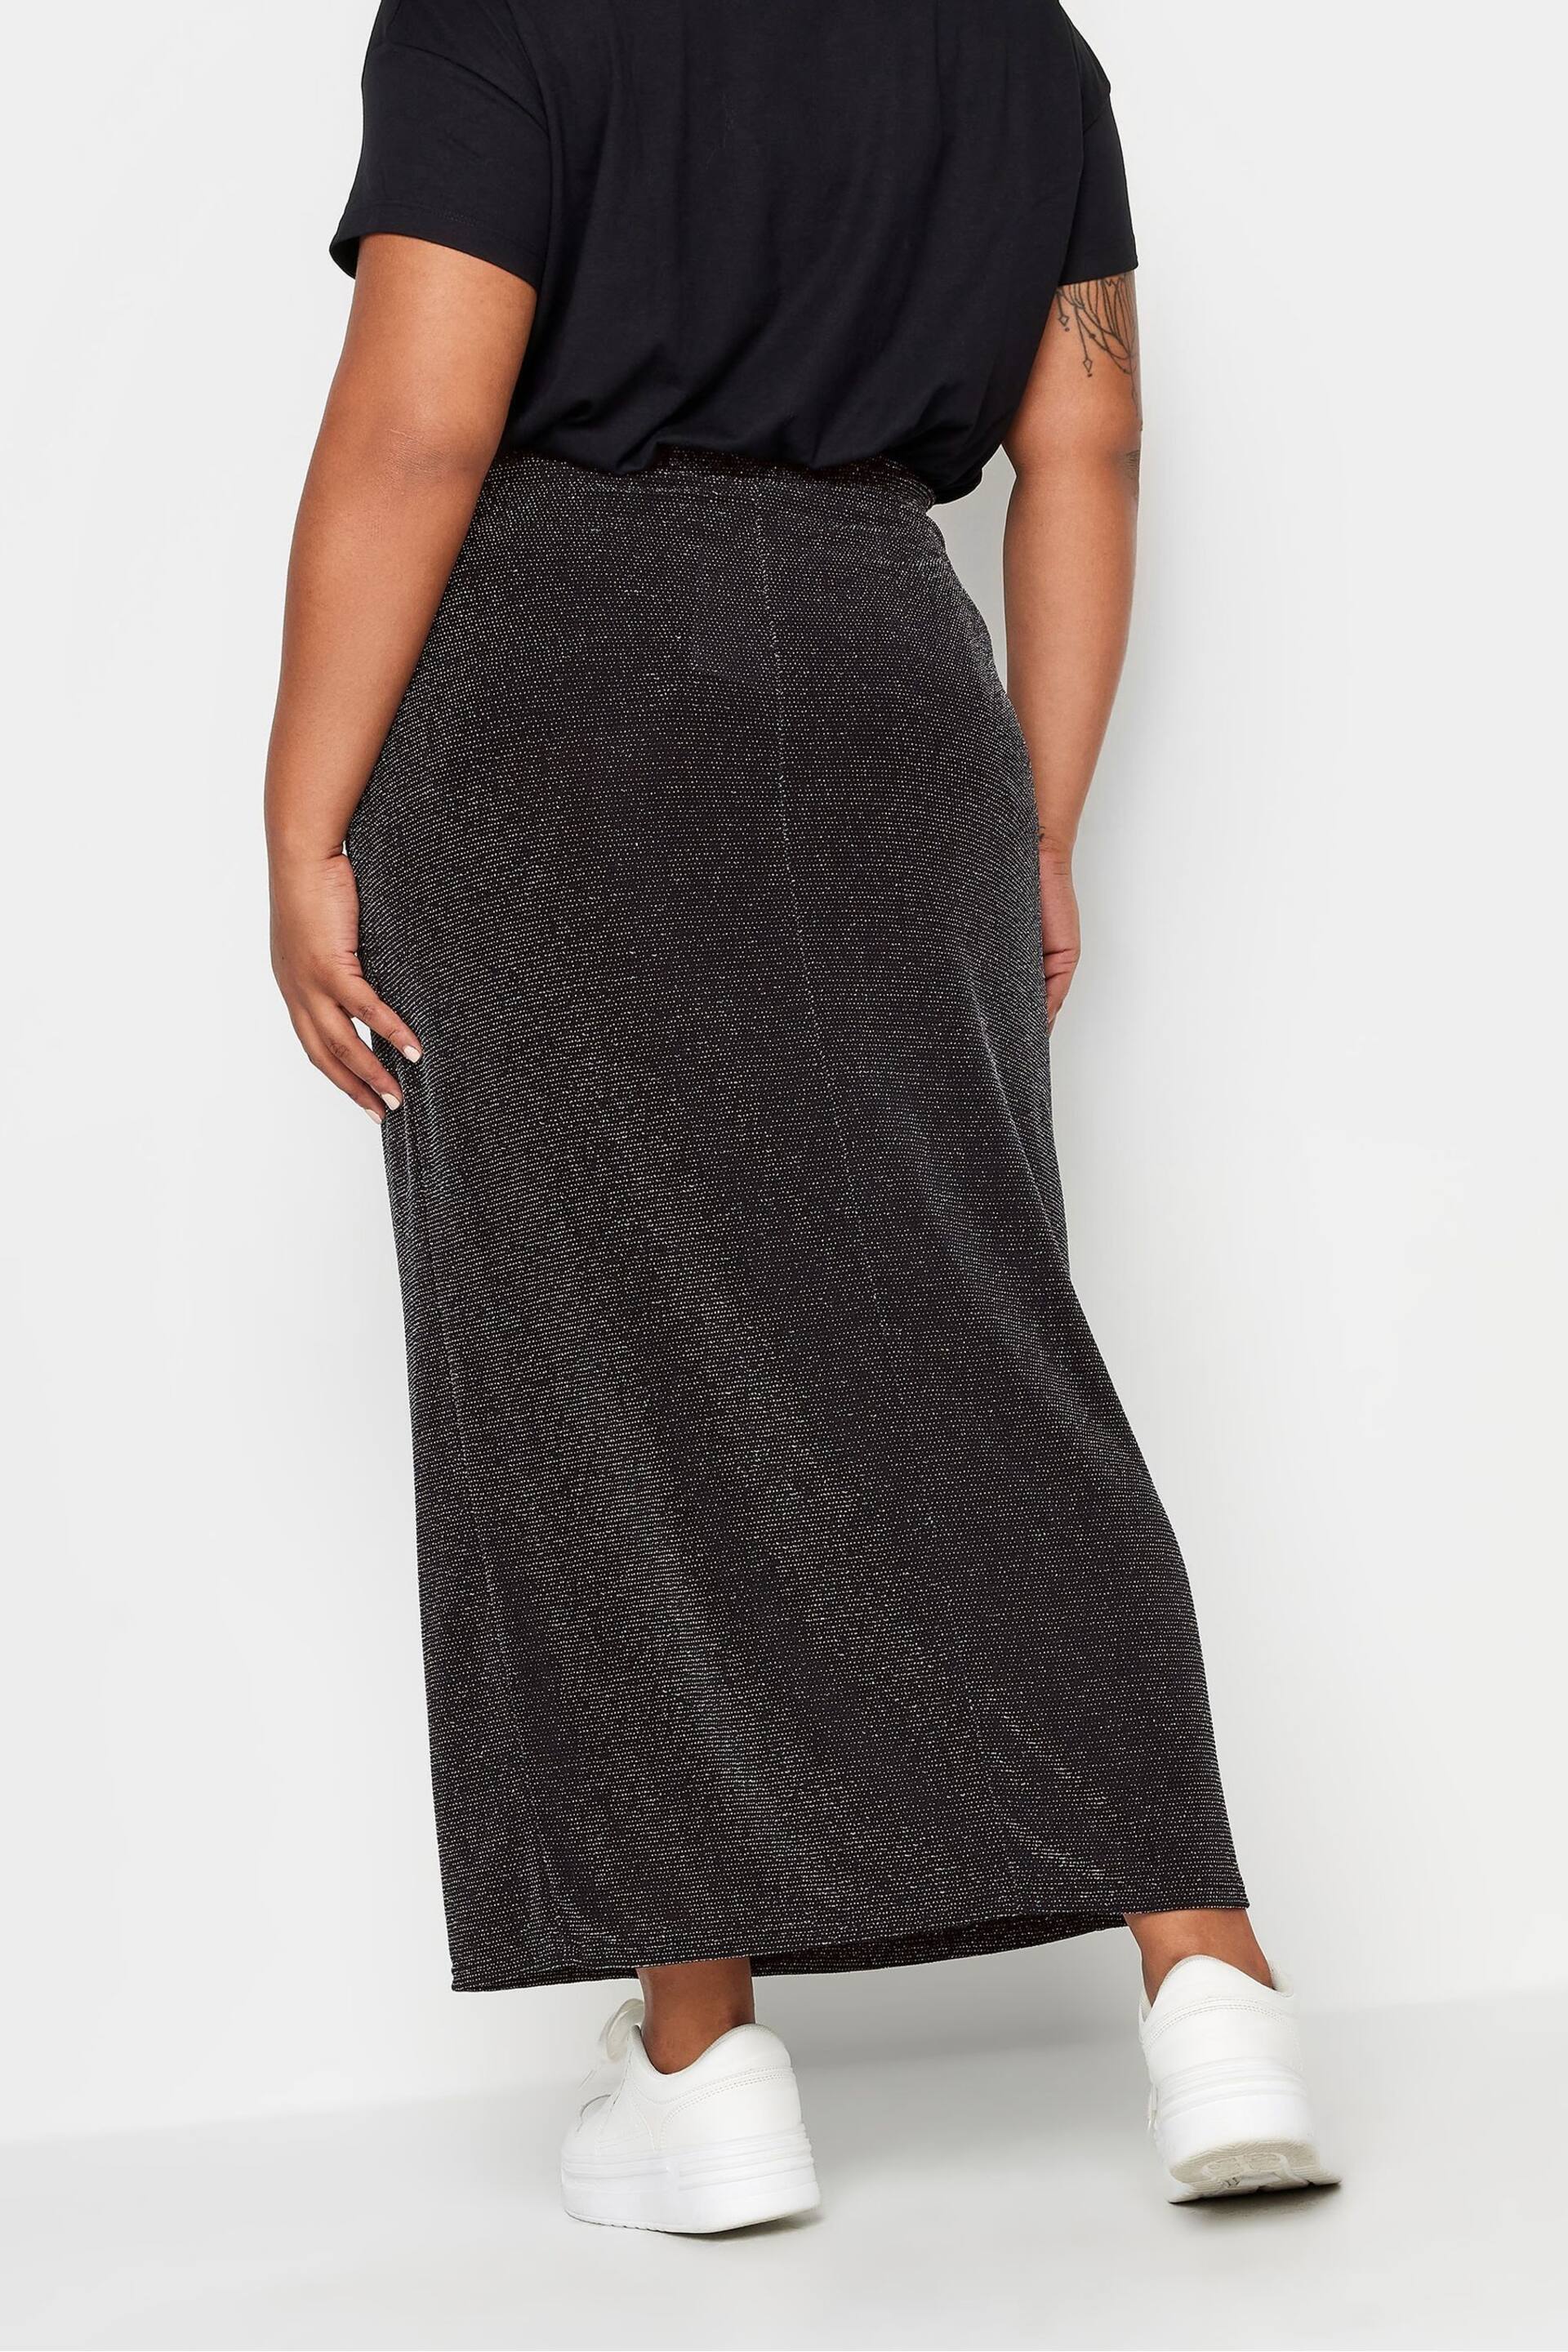 Yours Curve Black Brillo Tube Skirt - Image 2 of 5